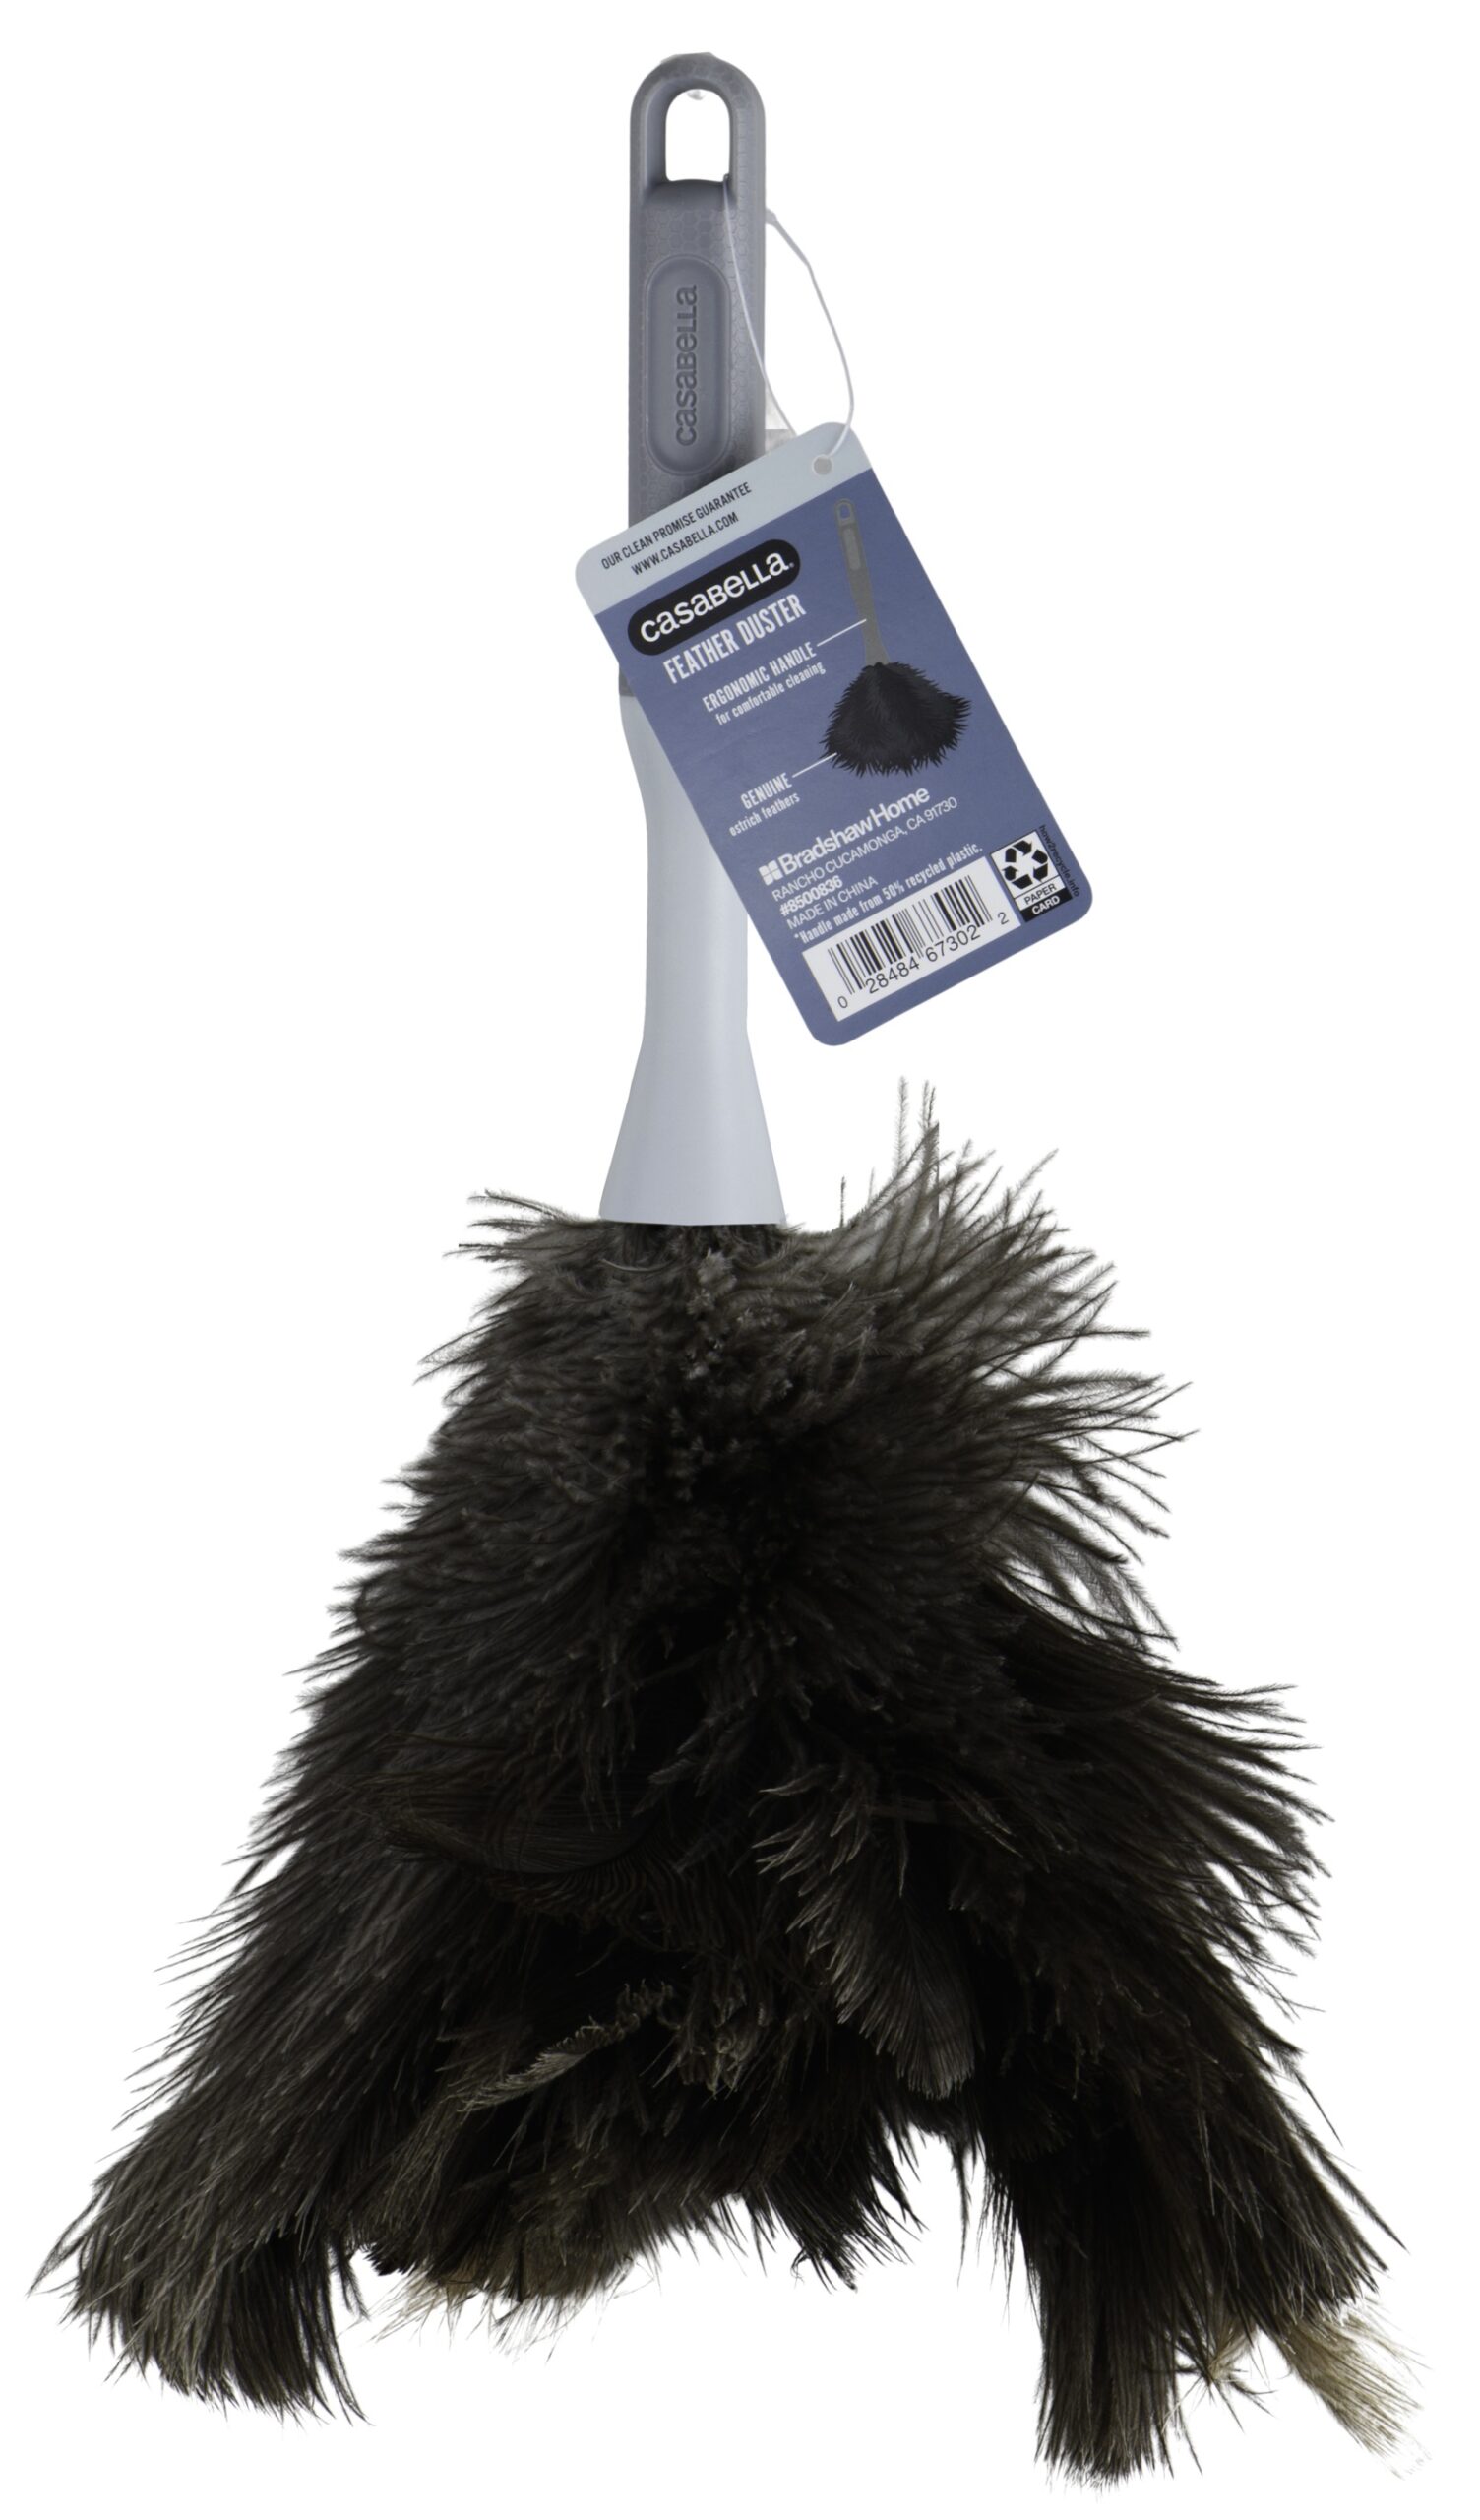 8500836_Casabella_Feather Duster_Packaging 2.jpg